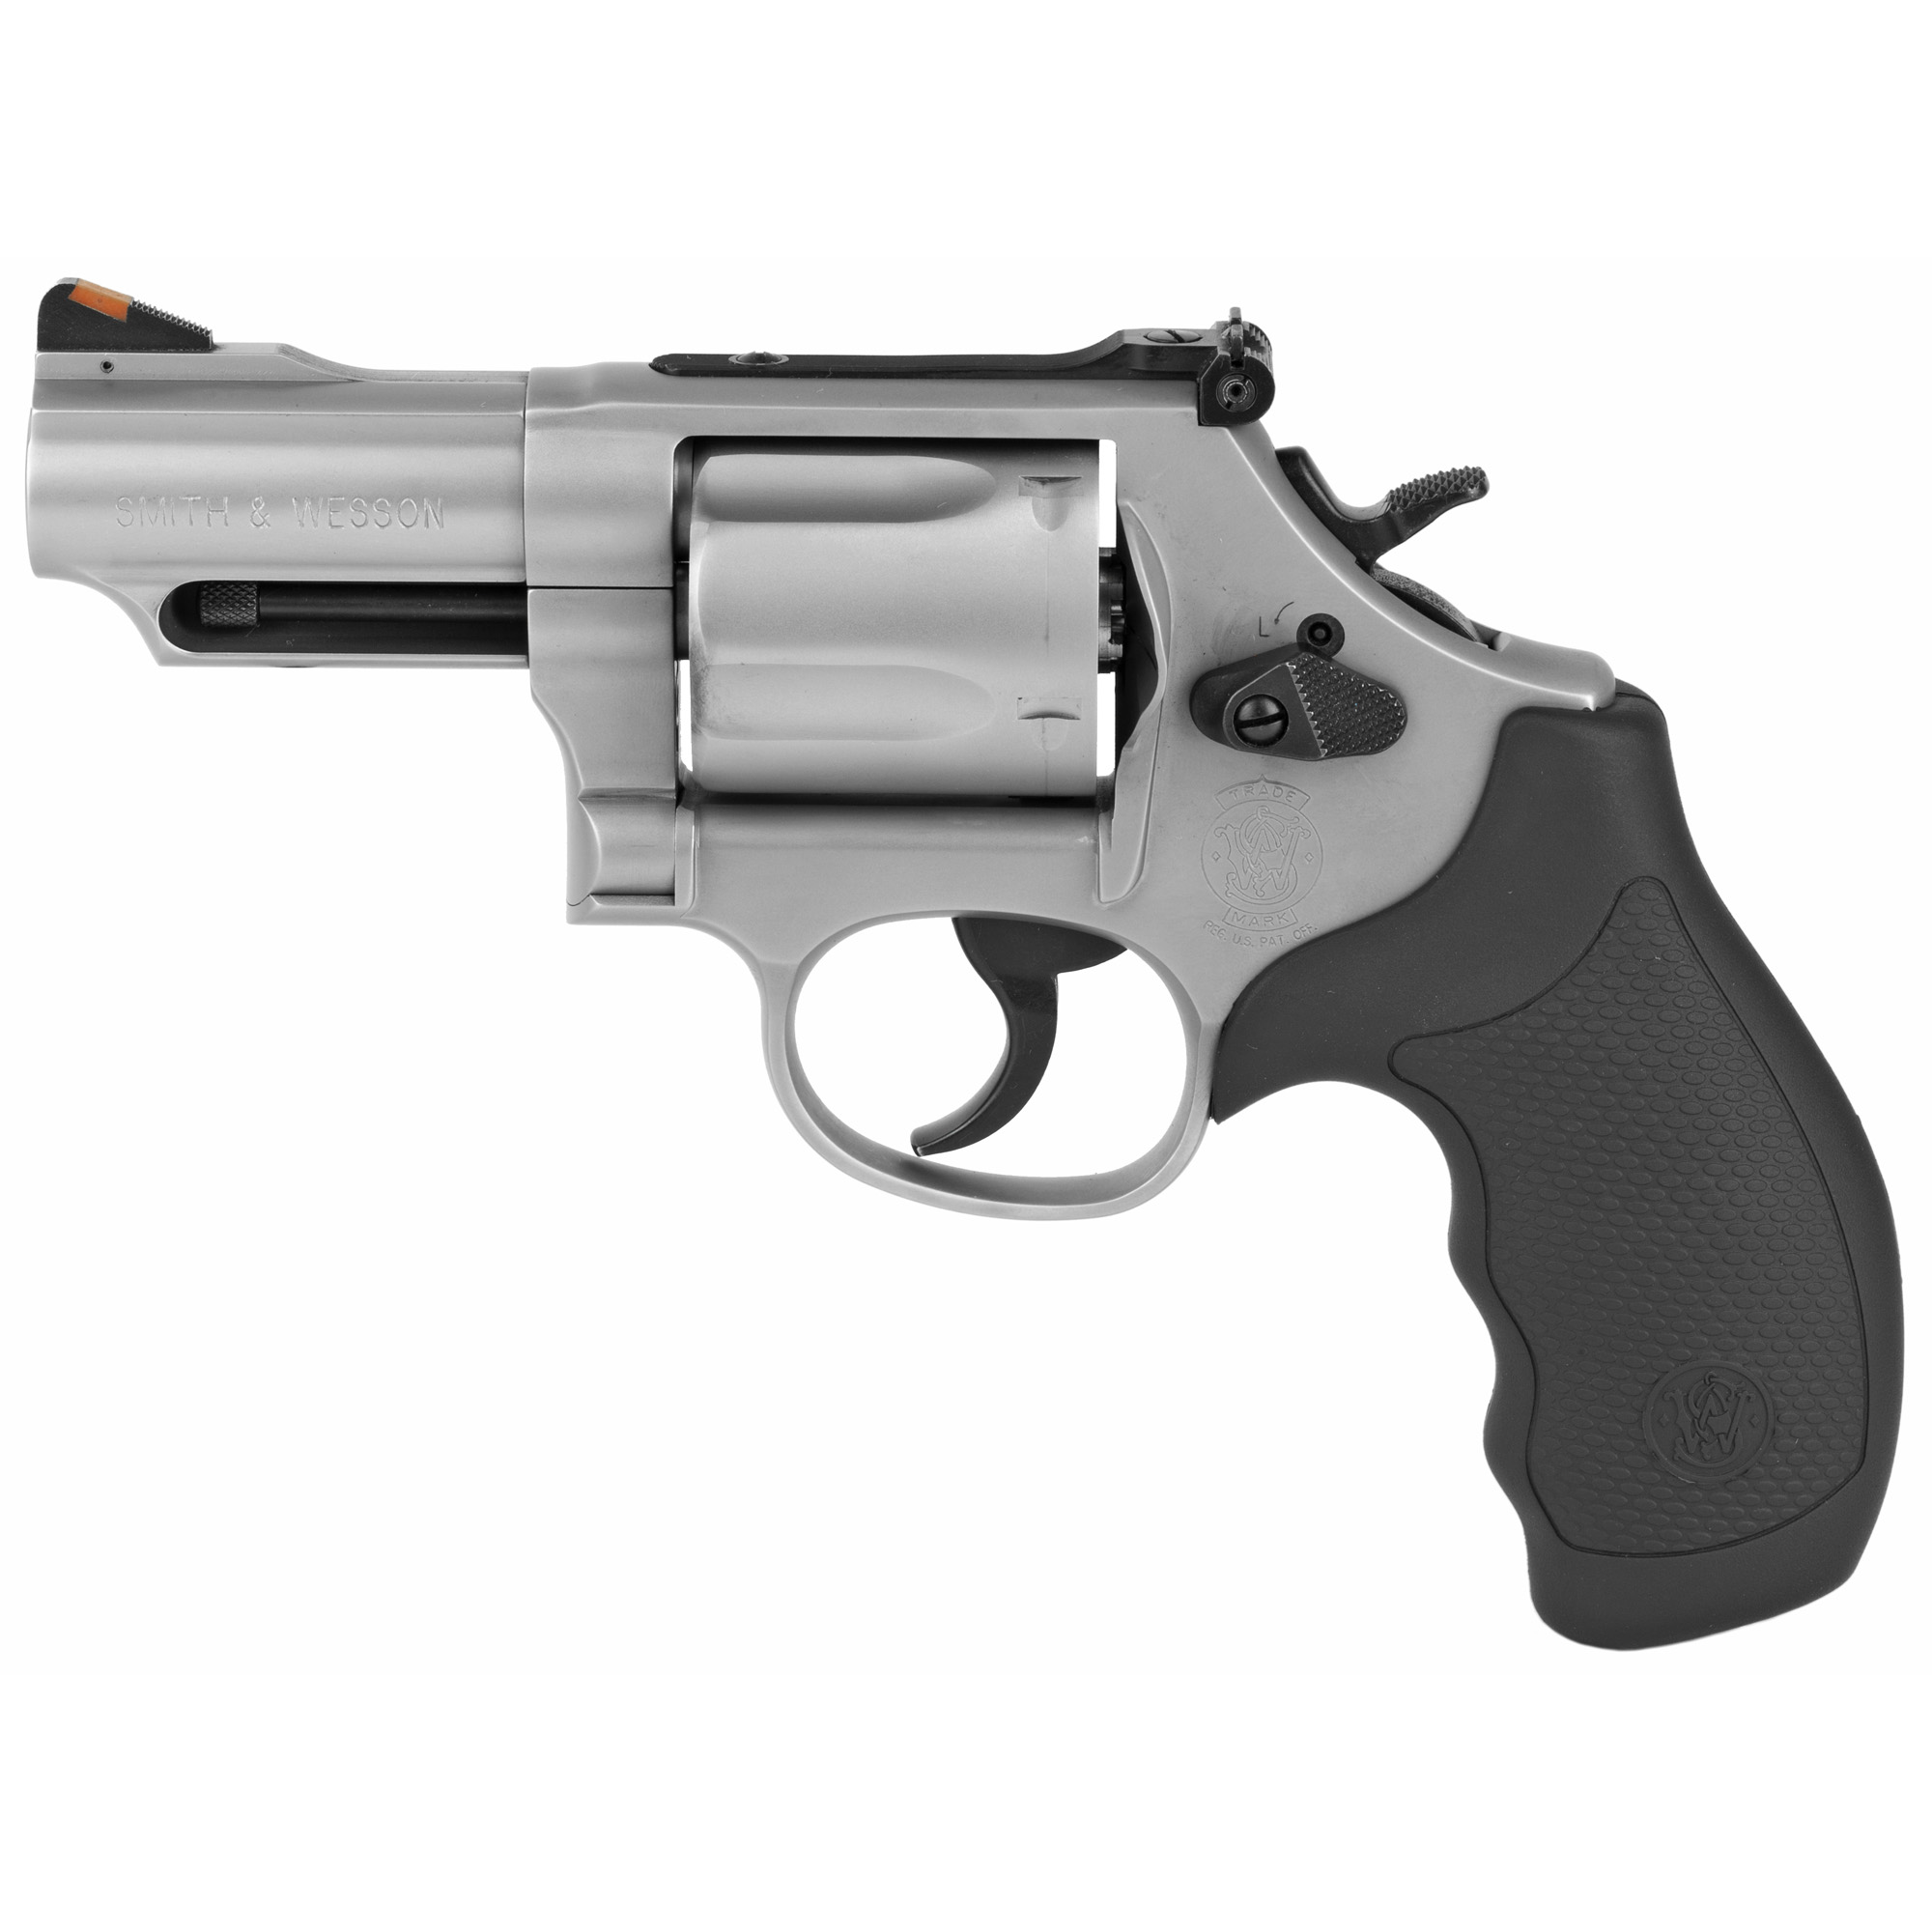 S&W 69 44MAG 2.75 5RD STS AS RBR